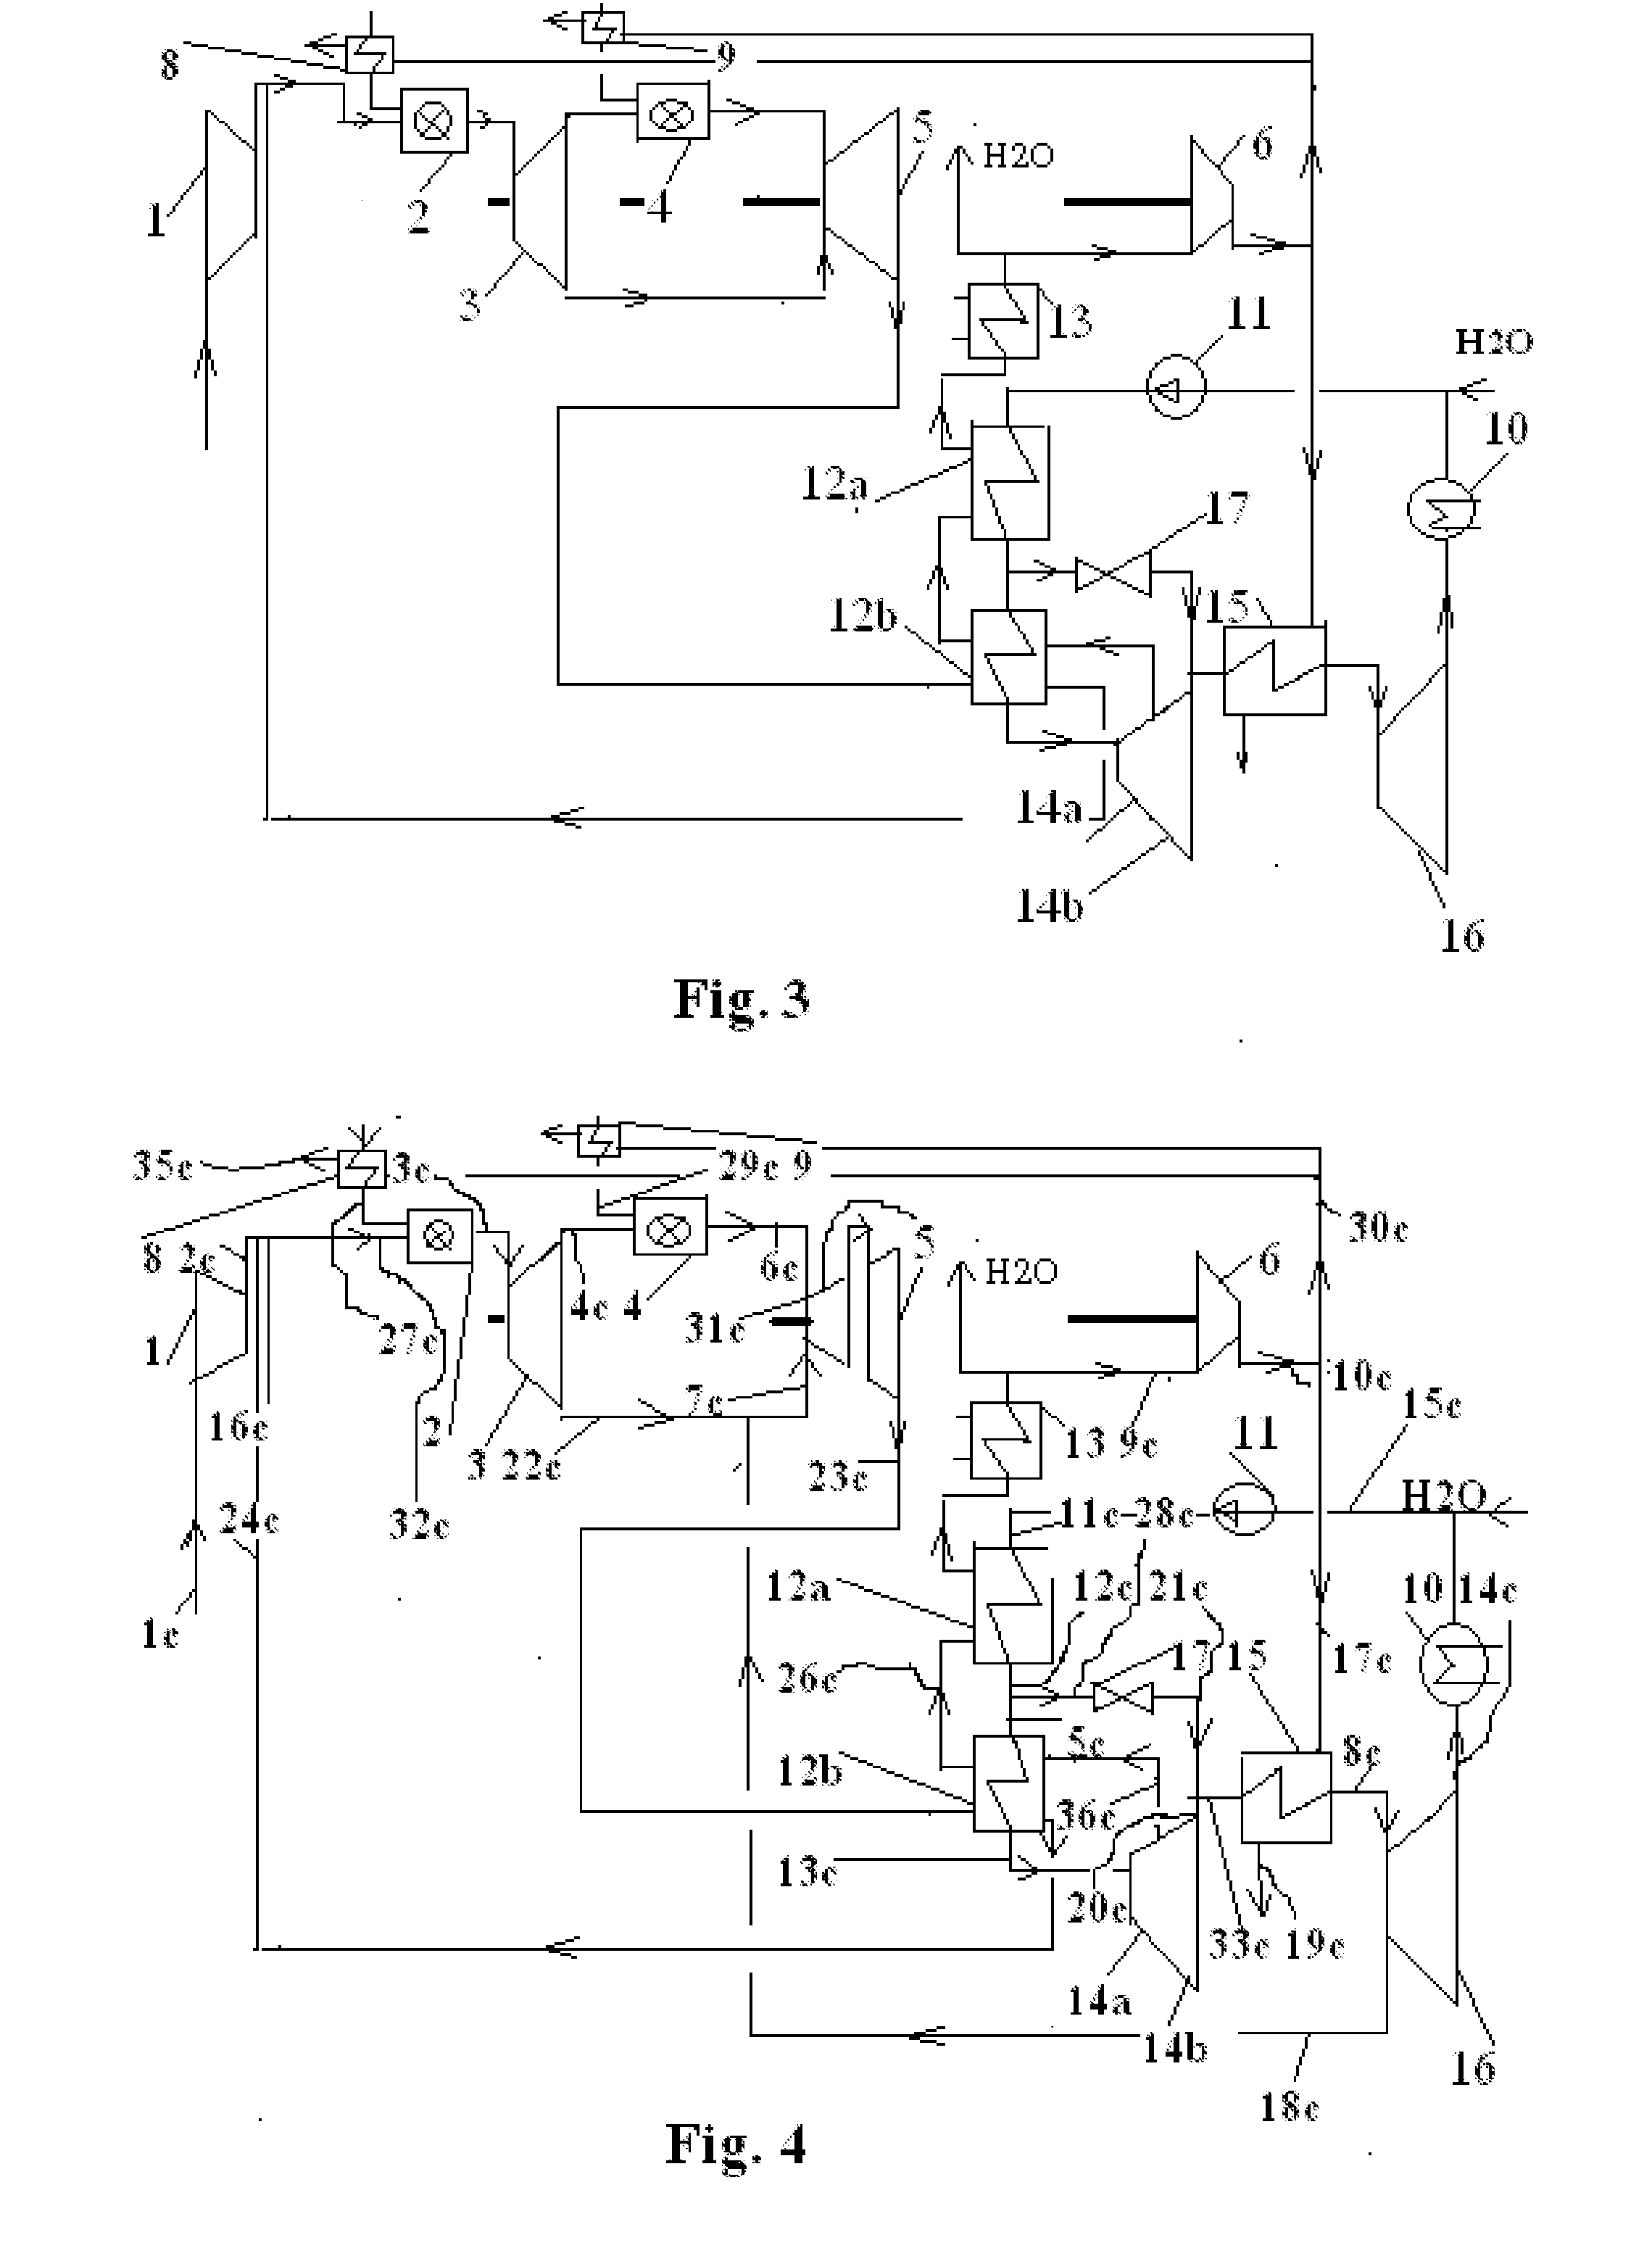 Method and apparatus for achieving a high efficiency in an open gas-turbine (combi) process